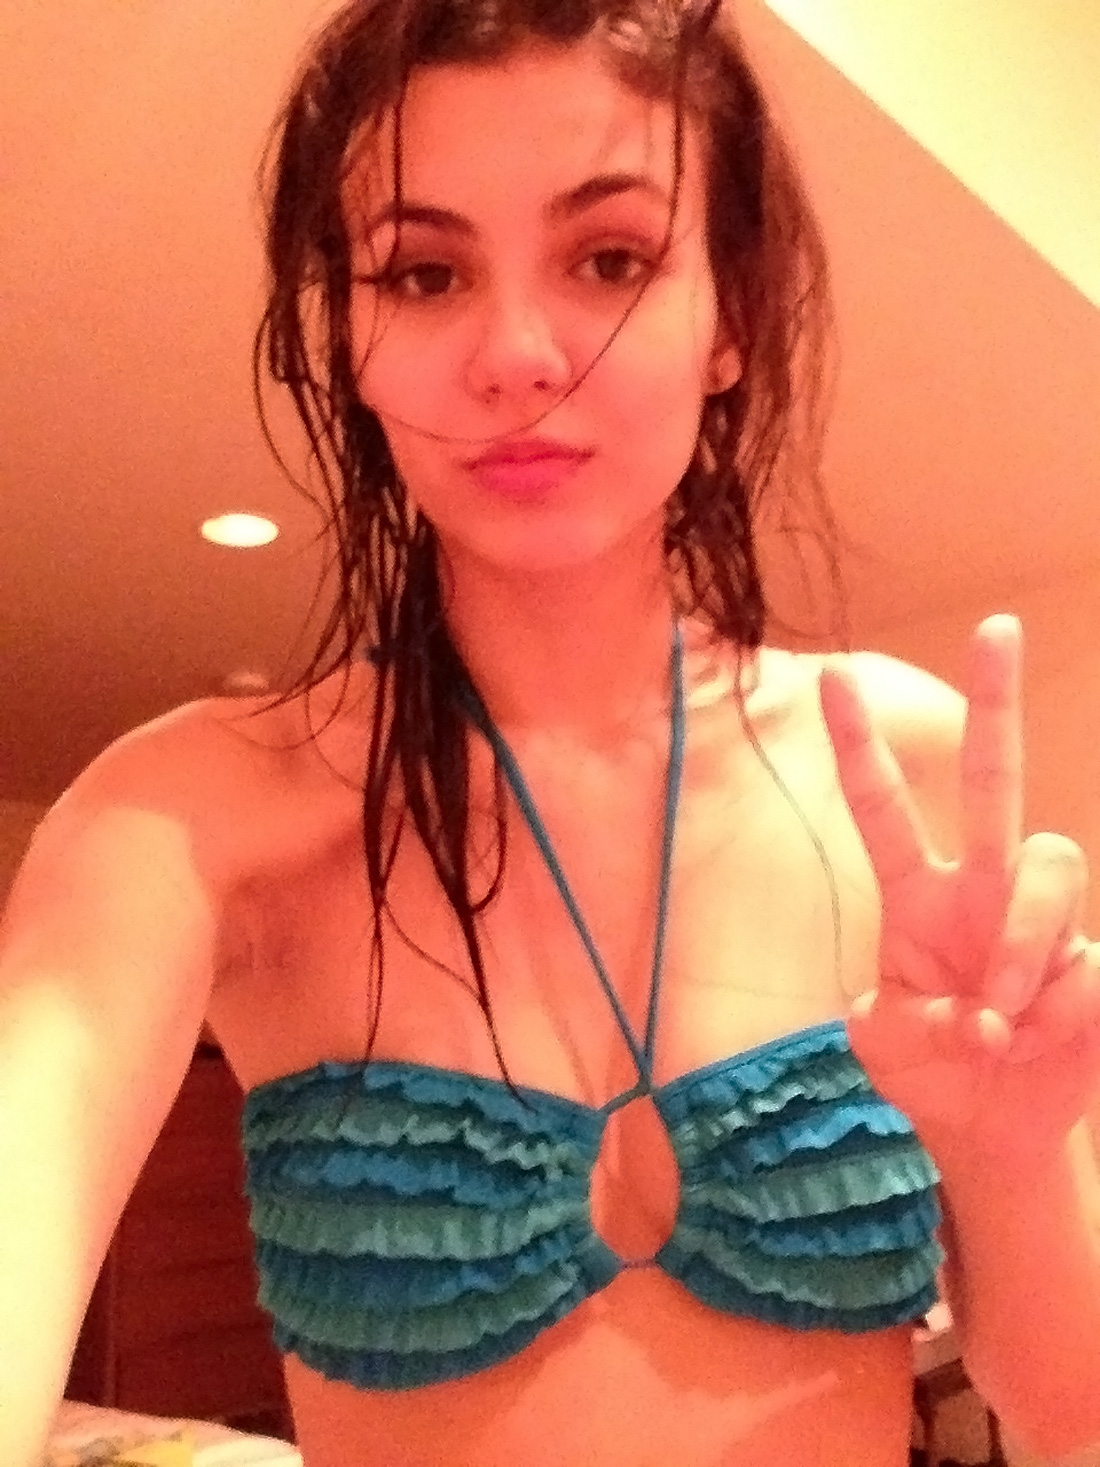 Hot Victoria Justice Porn Moving - Victoria Justice Naked Pics LEAKED - Awesome Nipples